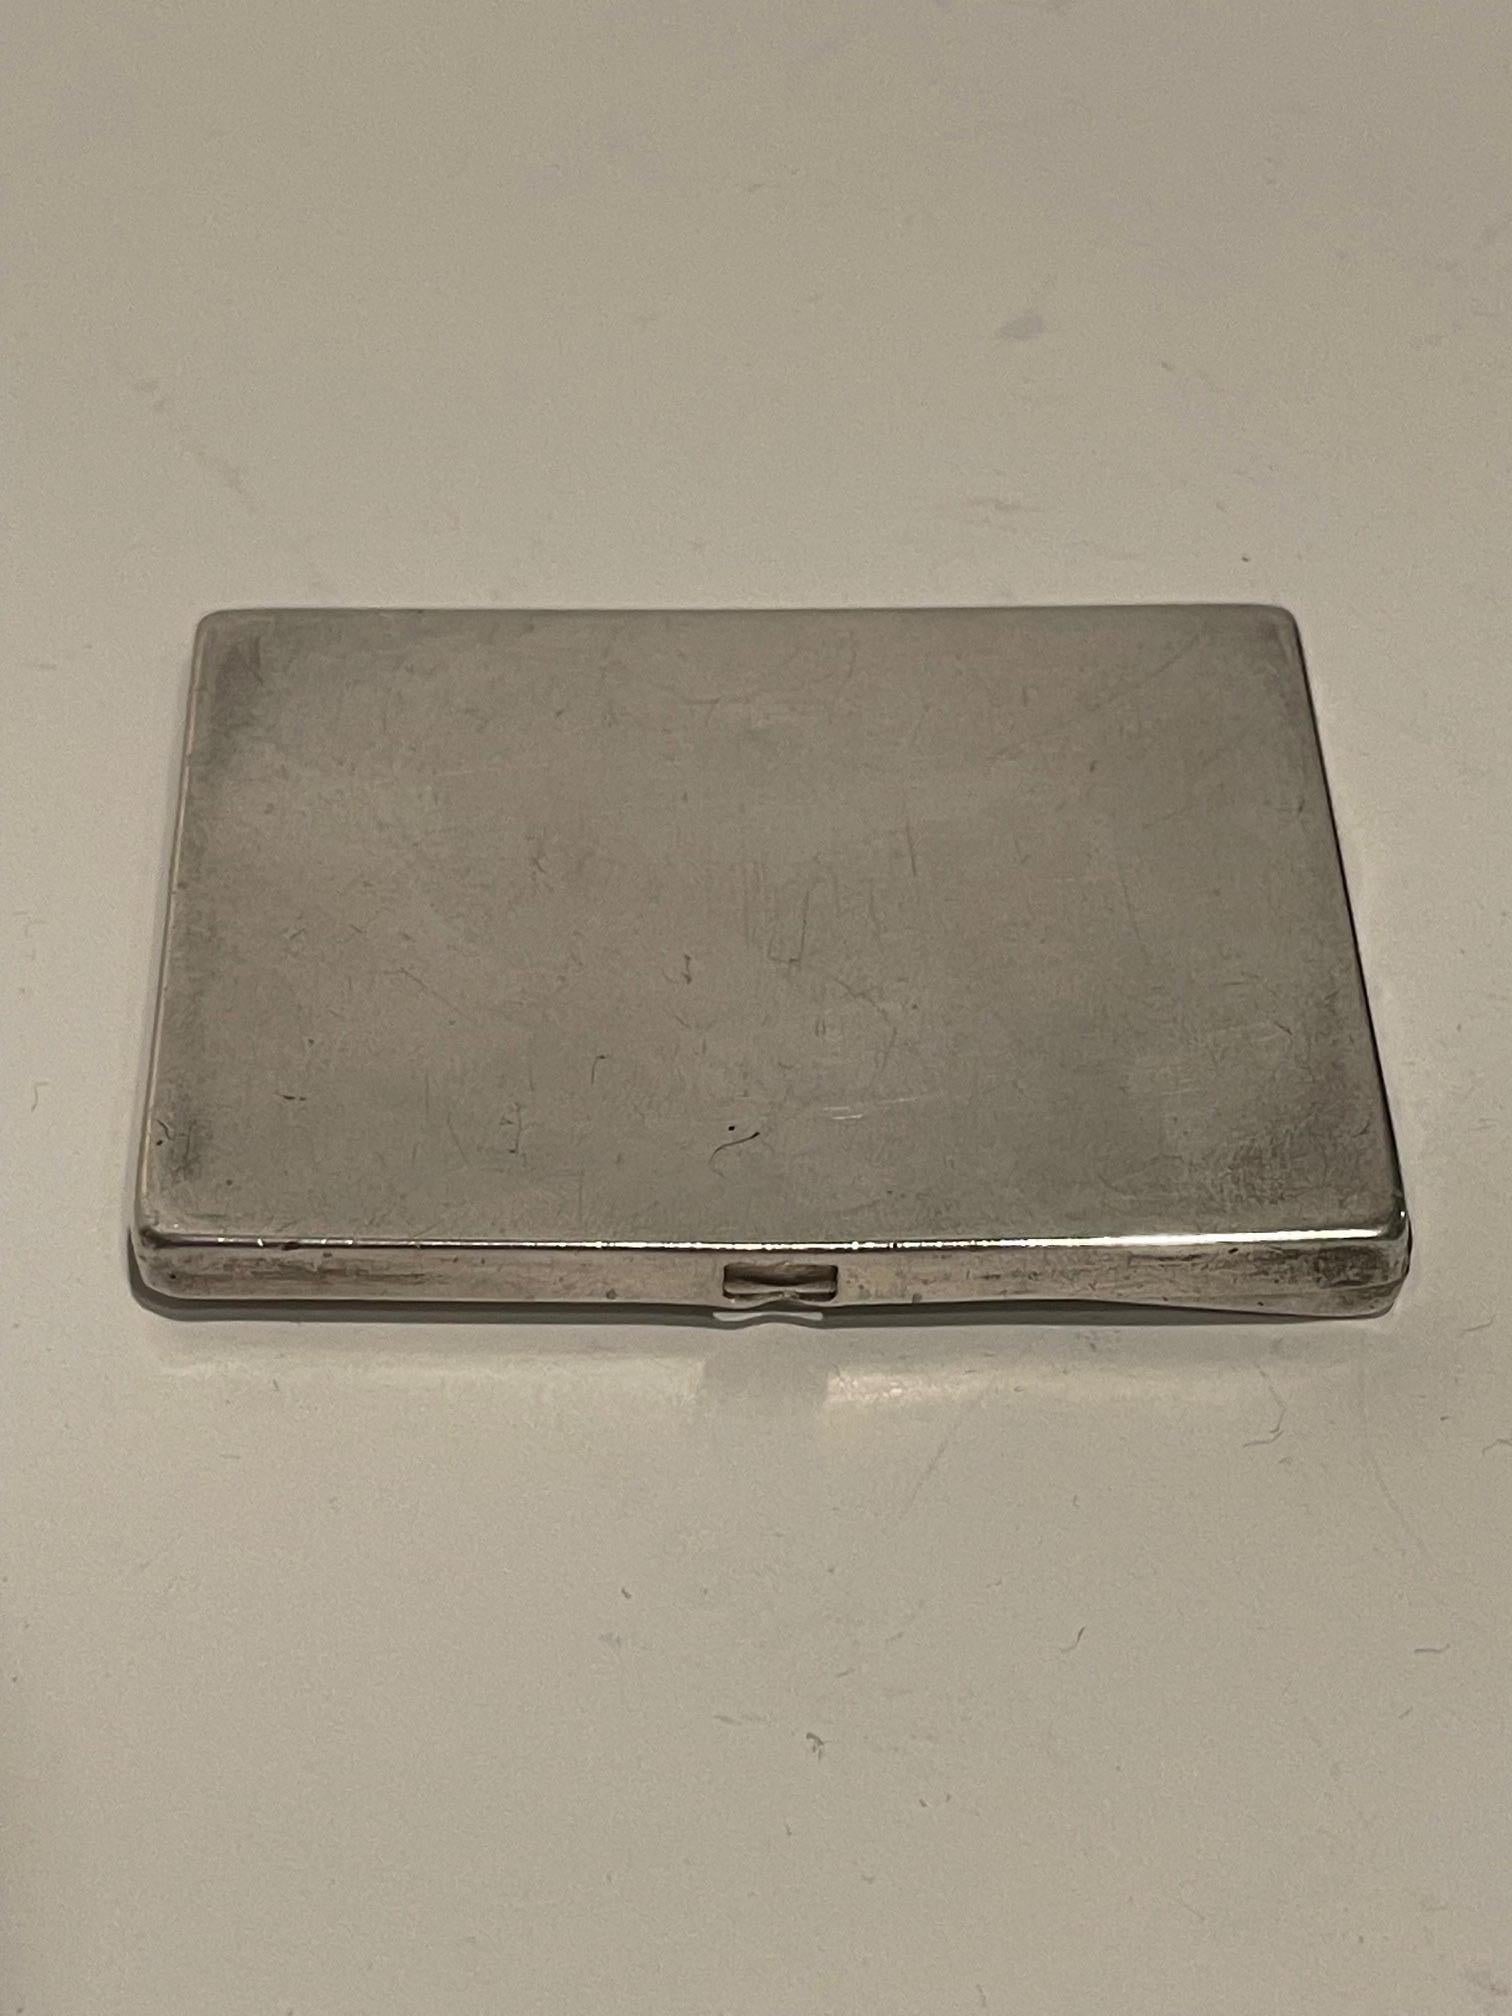 Silver Business Card Holder In Good Condition For Sale In Savannah, GA